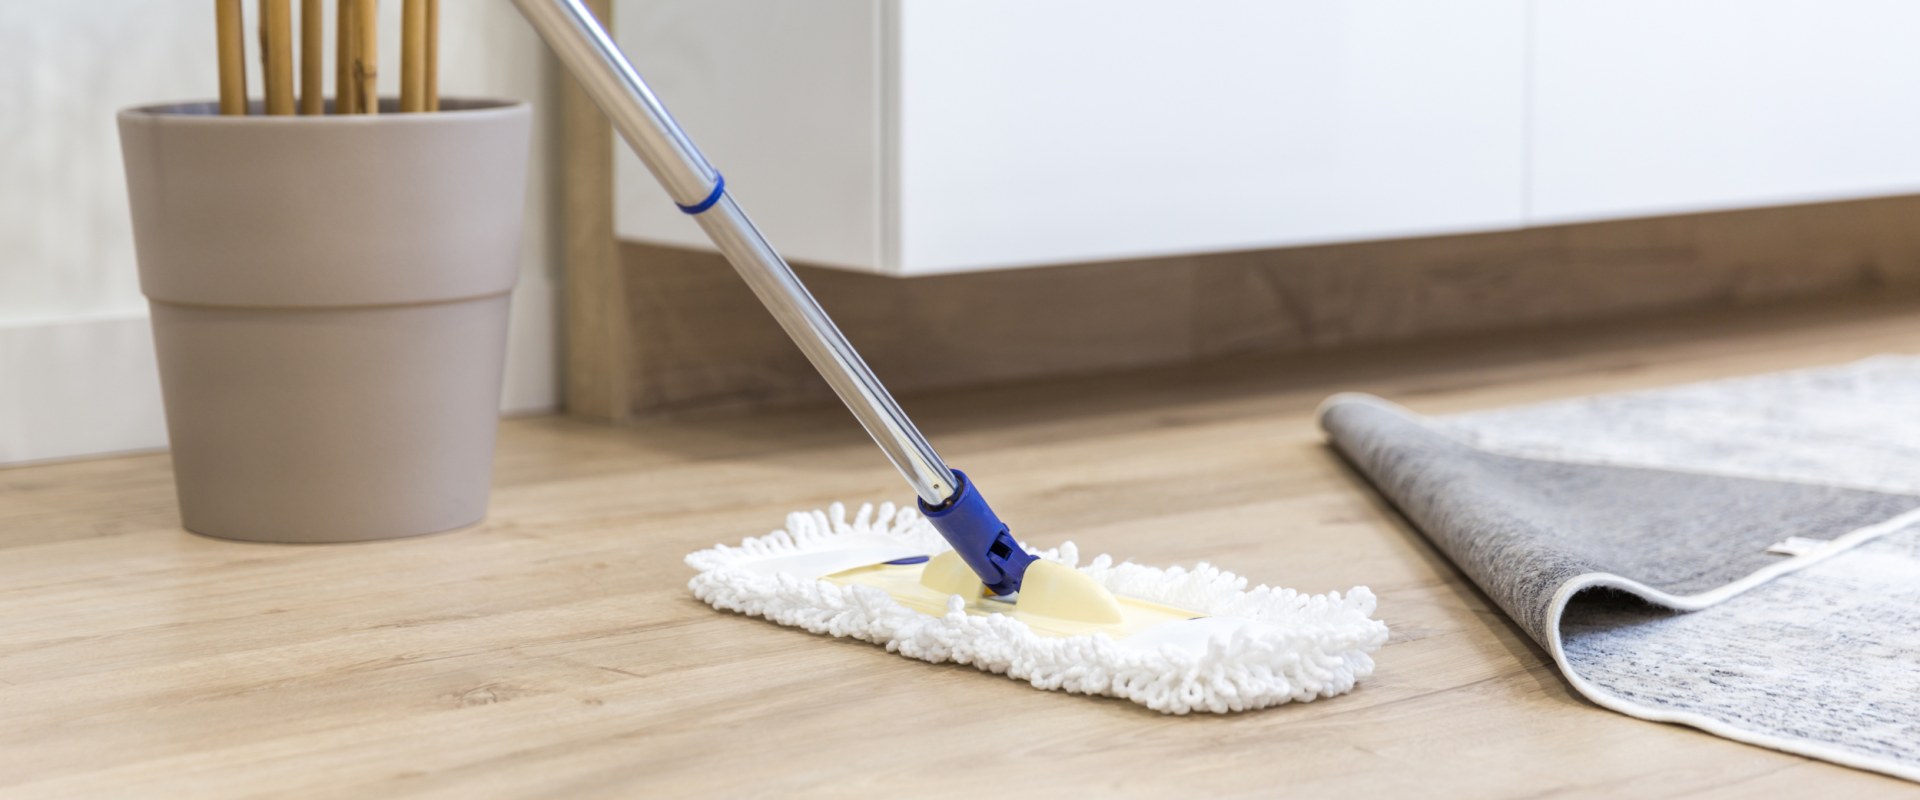 Do Cleaning Businesses in Austin, Texas Provide Their Own Cleaning Supplies?